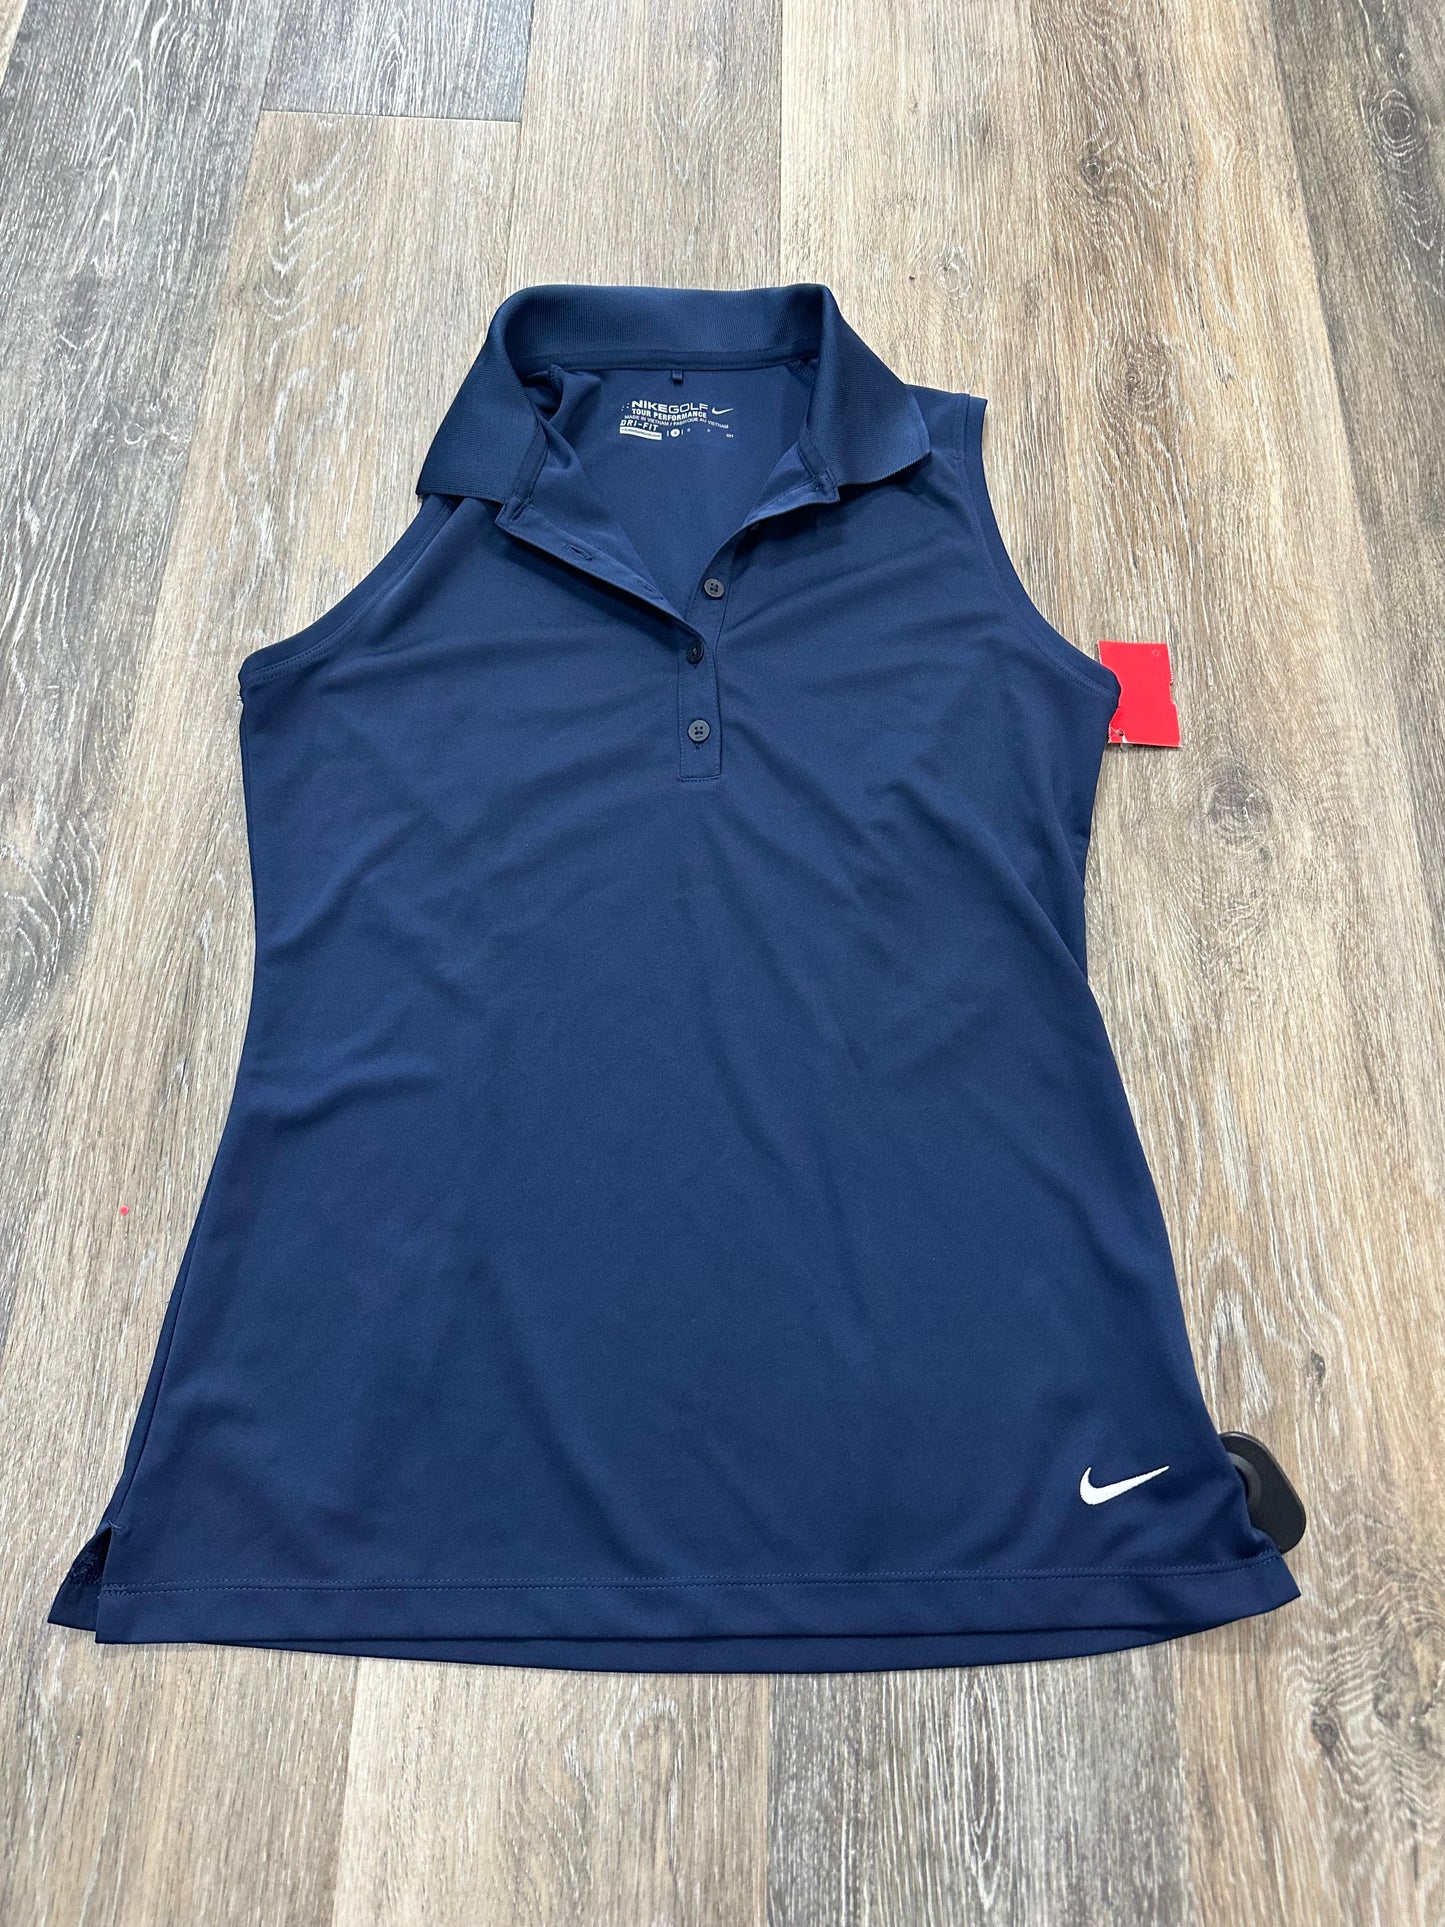 Navy Athletic Tank Top Nike Apparel, Size S